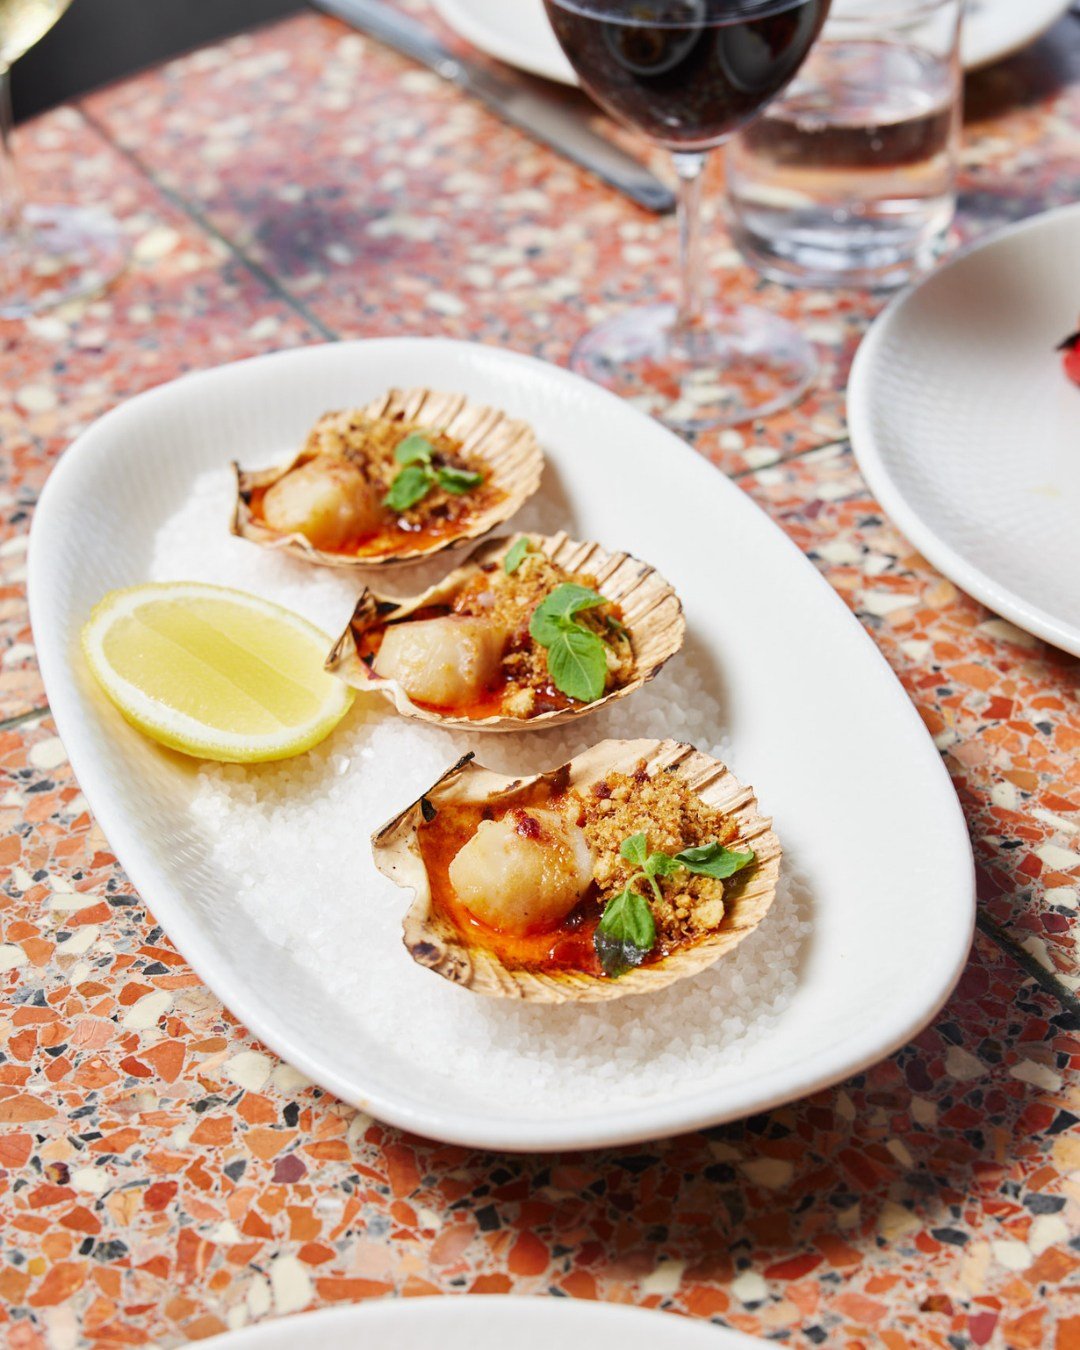 The perfect way to start! Scallops topped with prosciutto crumb and nduja butter. 

www.massimorestaurant.com.au/bookings for reservations or call us on (07) 3221 1663

123 Eagle St, Brisbane City QLD 4000

#Italian #MassimoRestaurant #thisisbrisbane